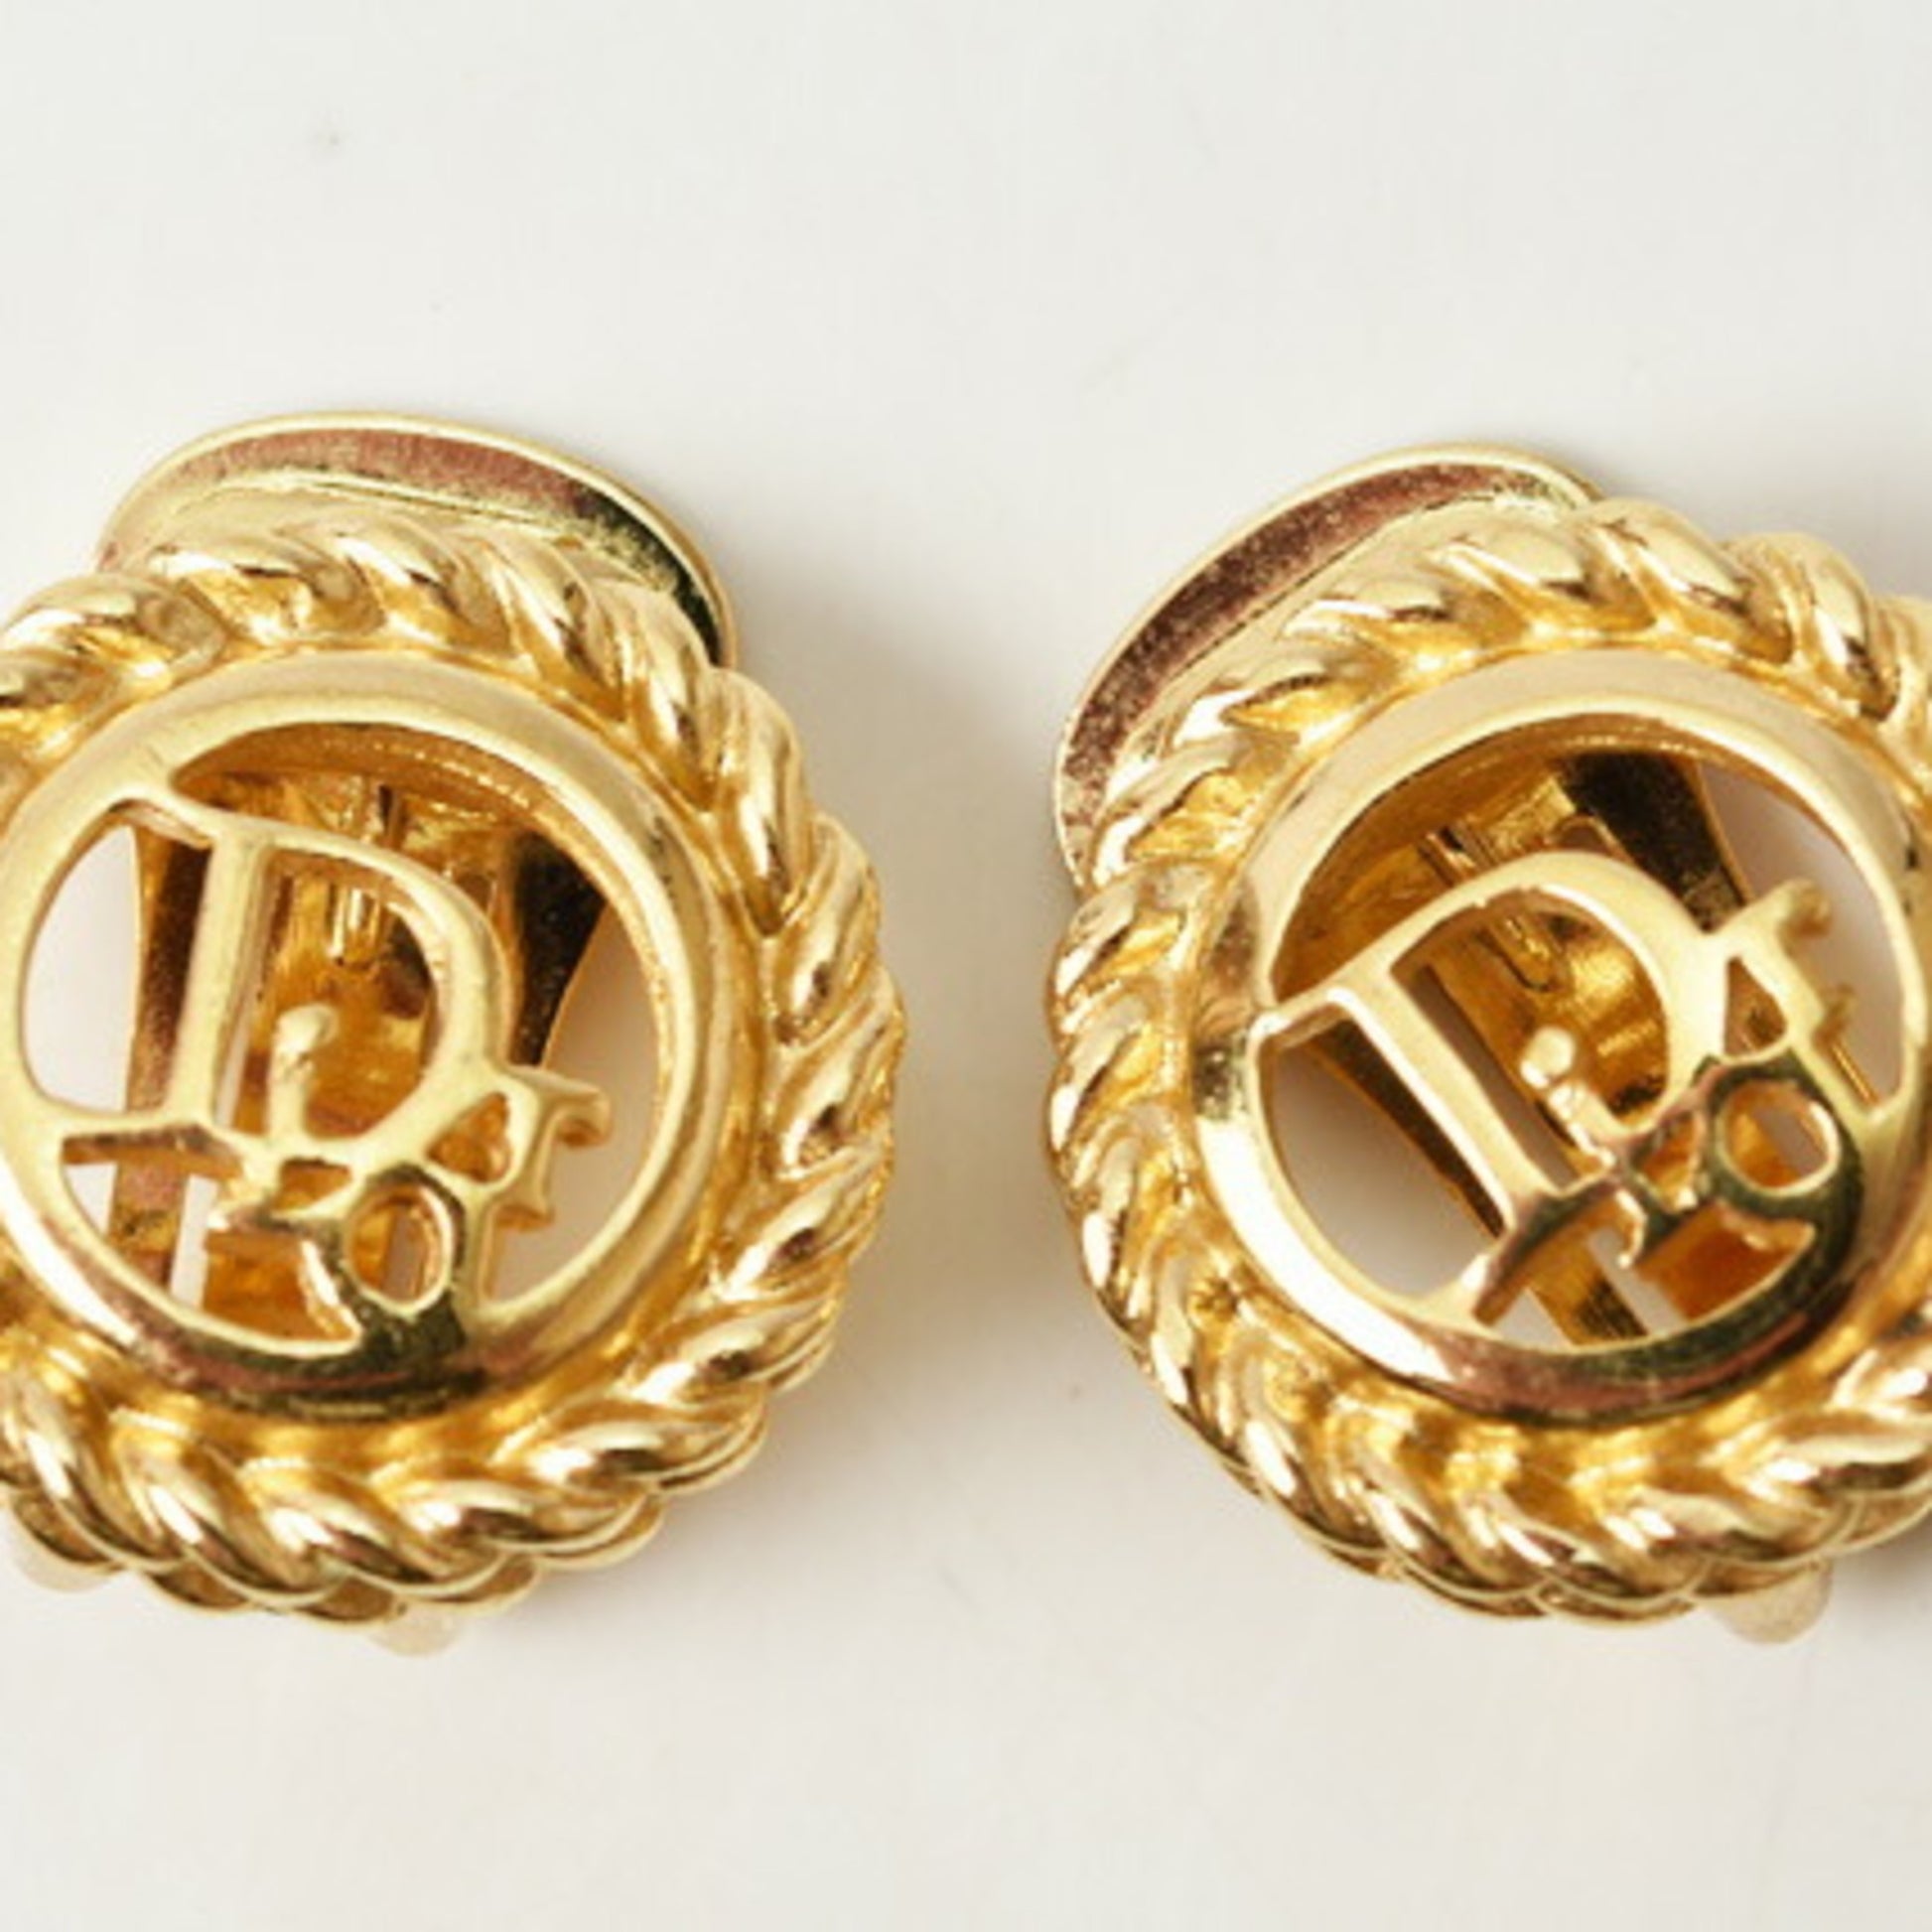 1995 Vintage CHANEL Quilted Resin CC Cufflinks Black Gold Unisex